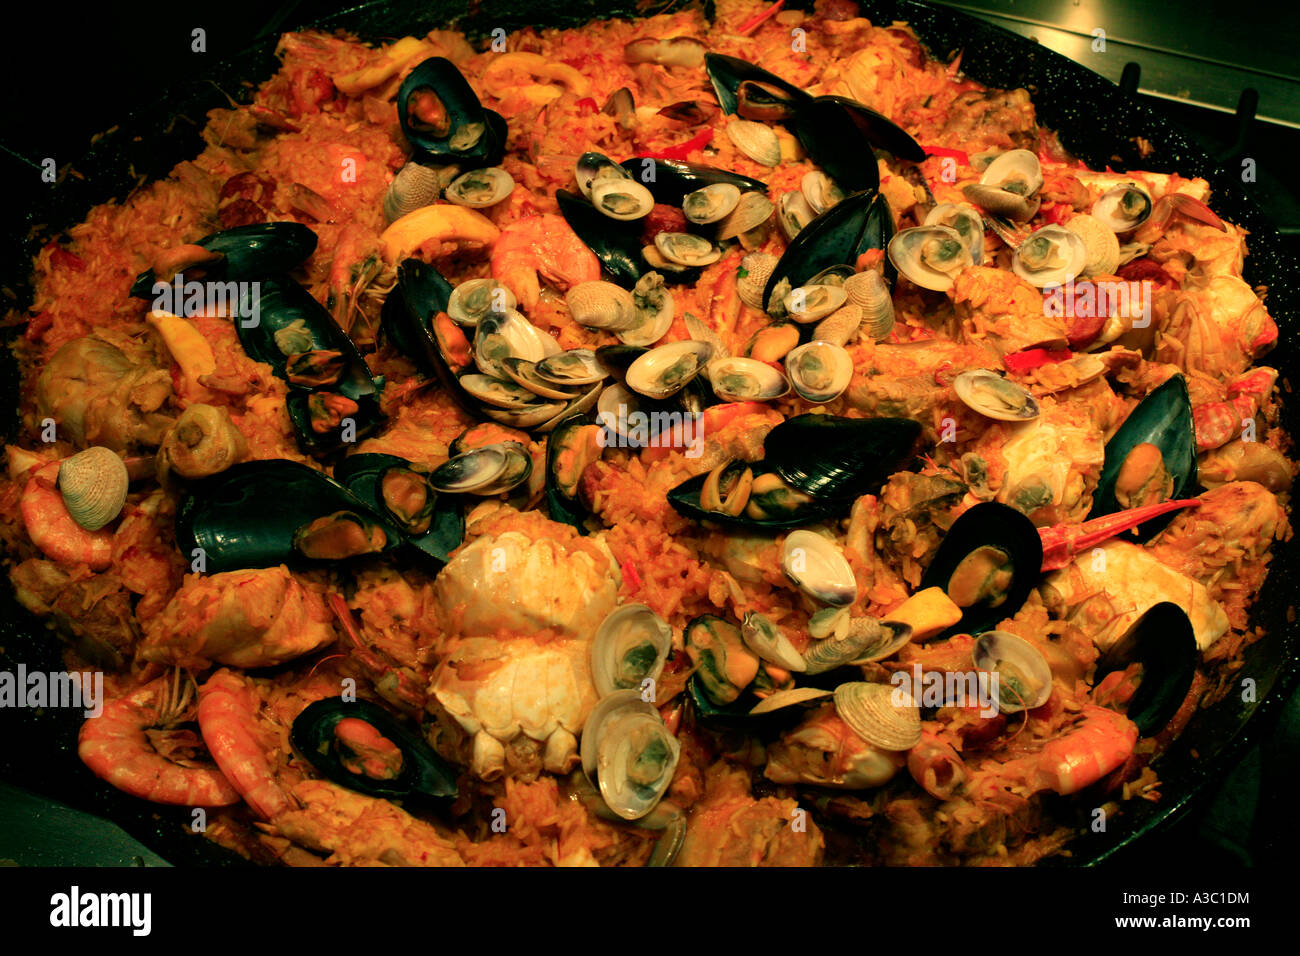 A close up photograph of a plain paella with crab claws squid chicken and pork Stock Photo